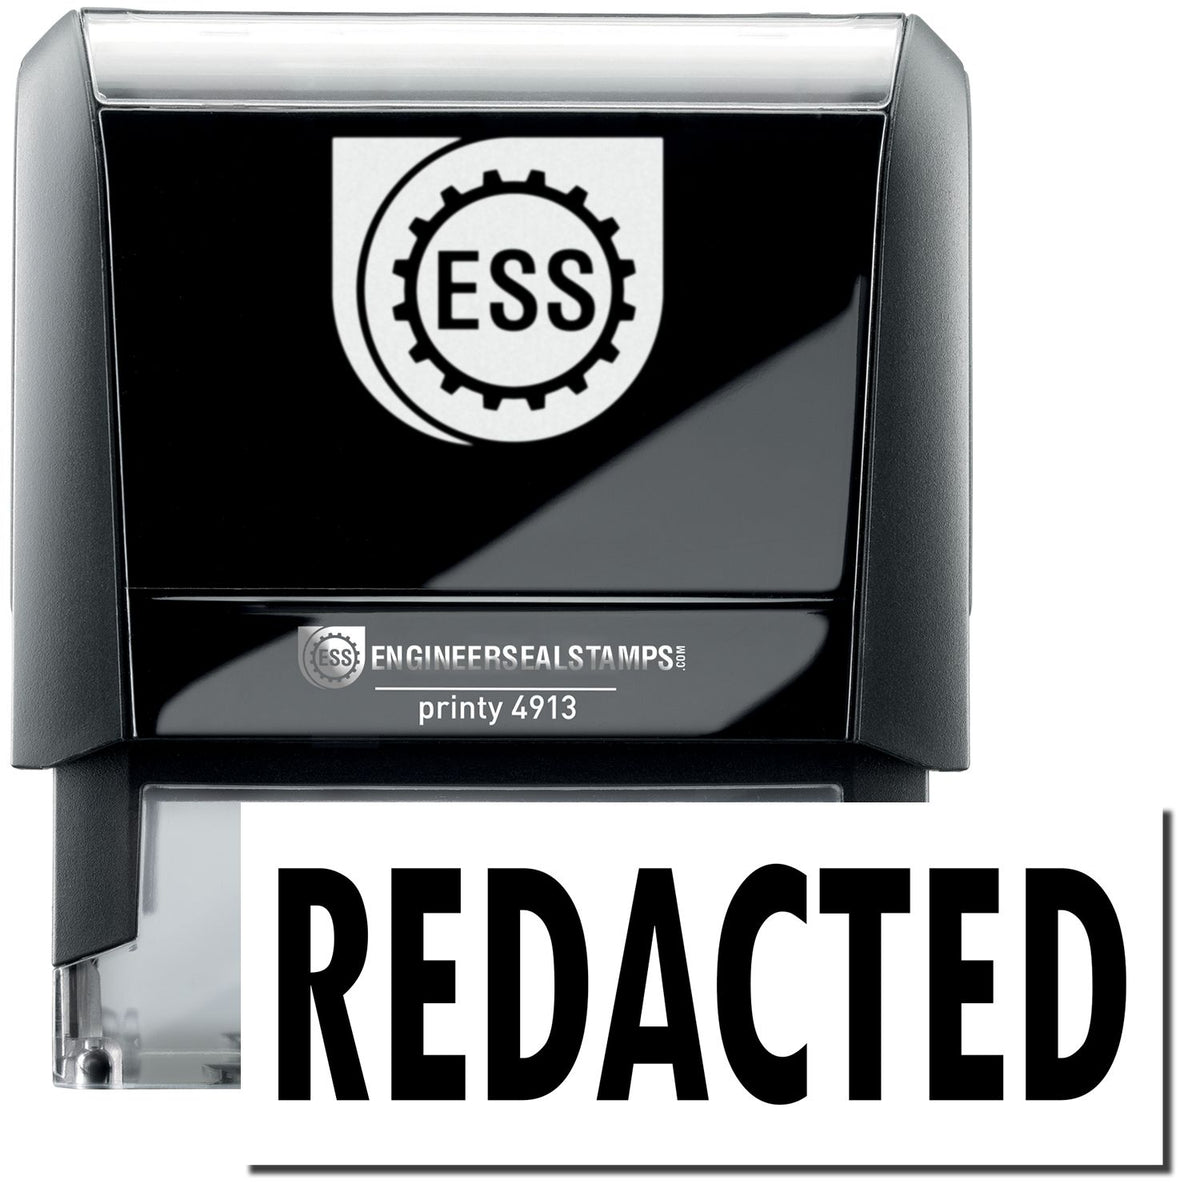 A self-inking stamp with a stamped image showing how the text &quot;REDACTED&quot; in a large bold font is displayed by it.